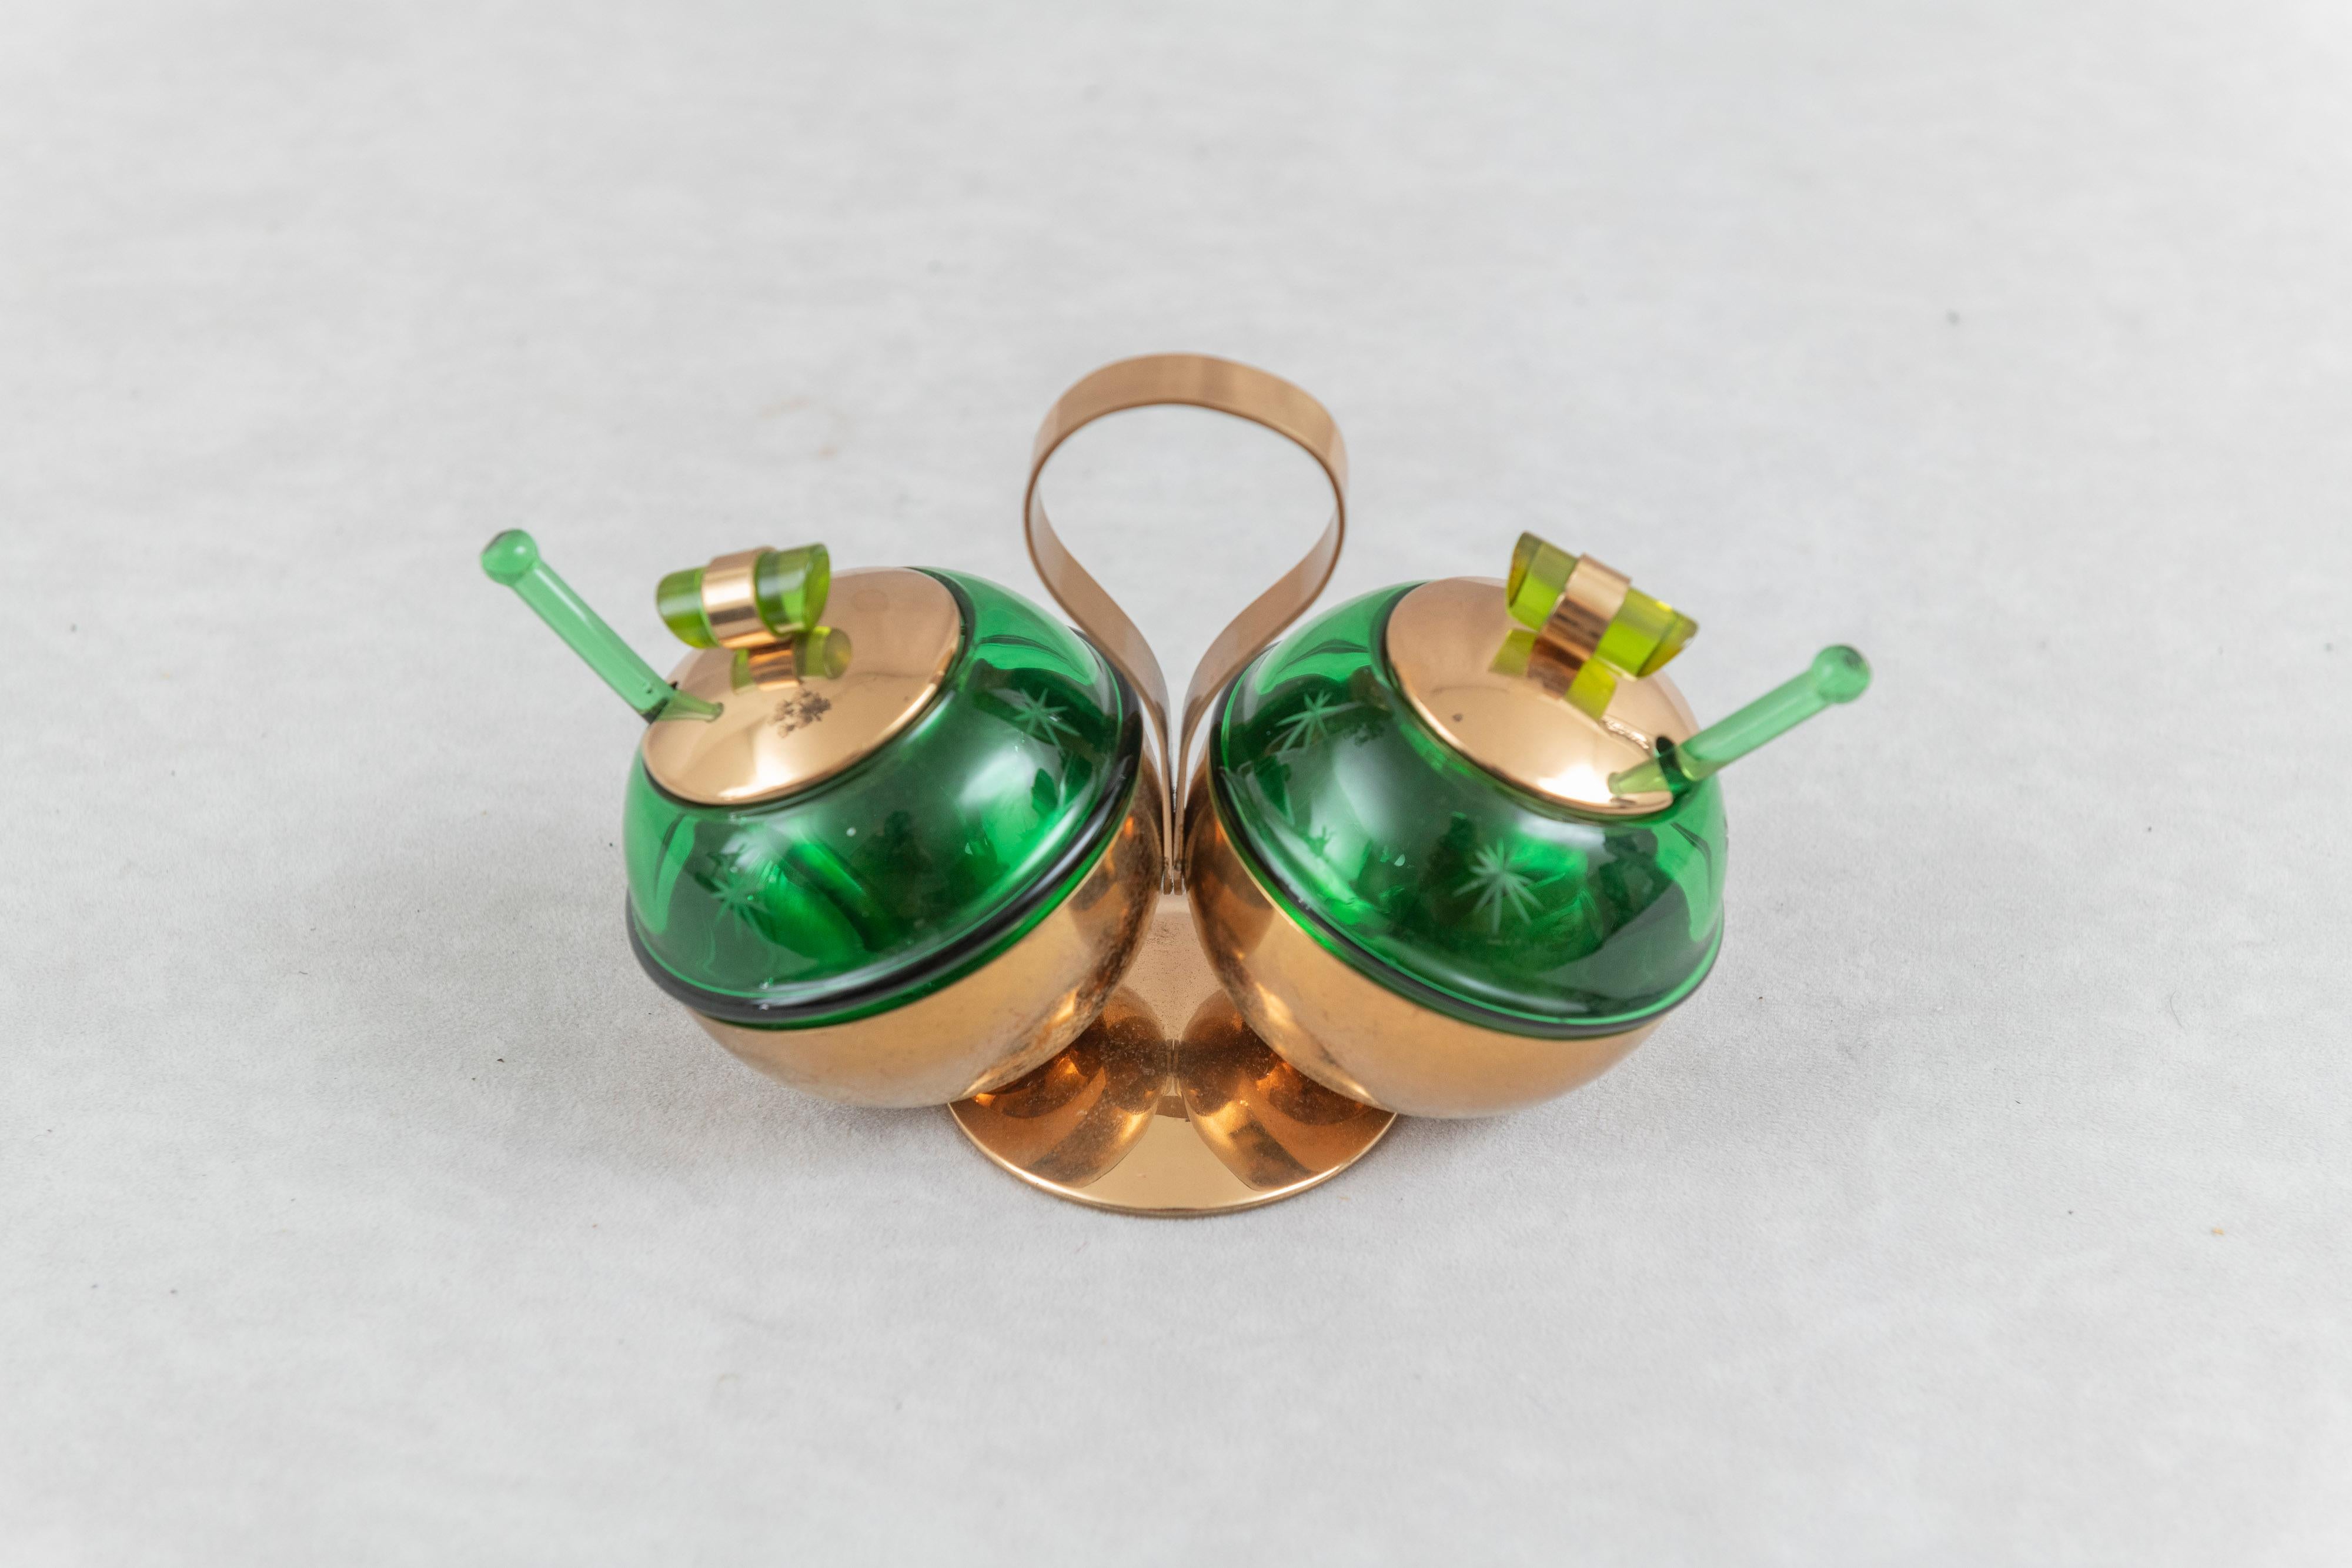 This very striking double condiment set really caught our attention. Admittedly this is something we rarely buy, but just one look made us buyers. The commitment to the art deco style with the green glass and copper is an eye catcher. Having all the